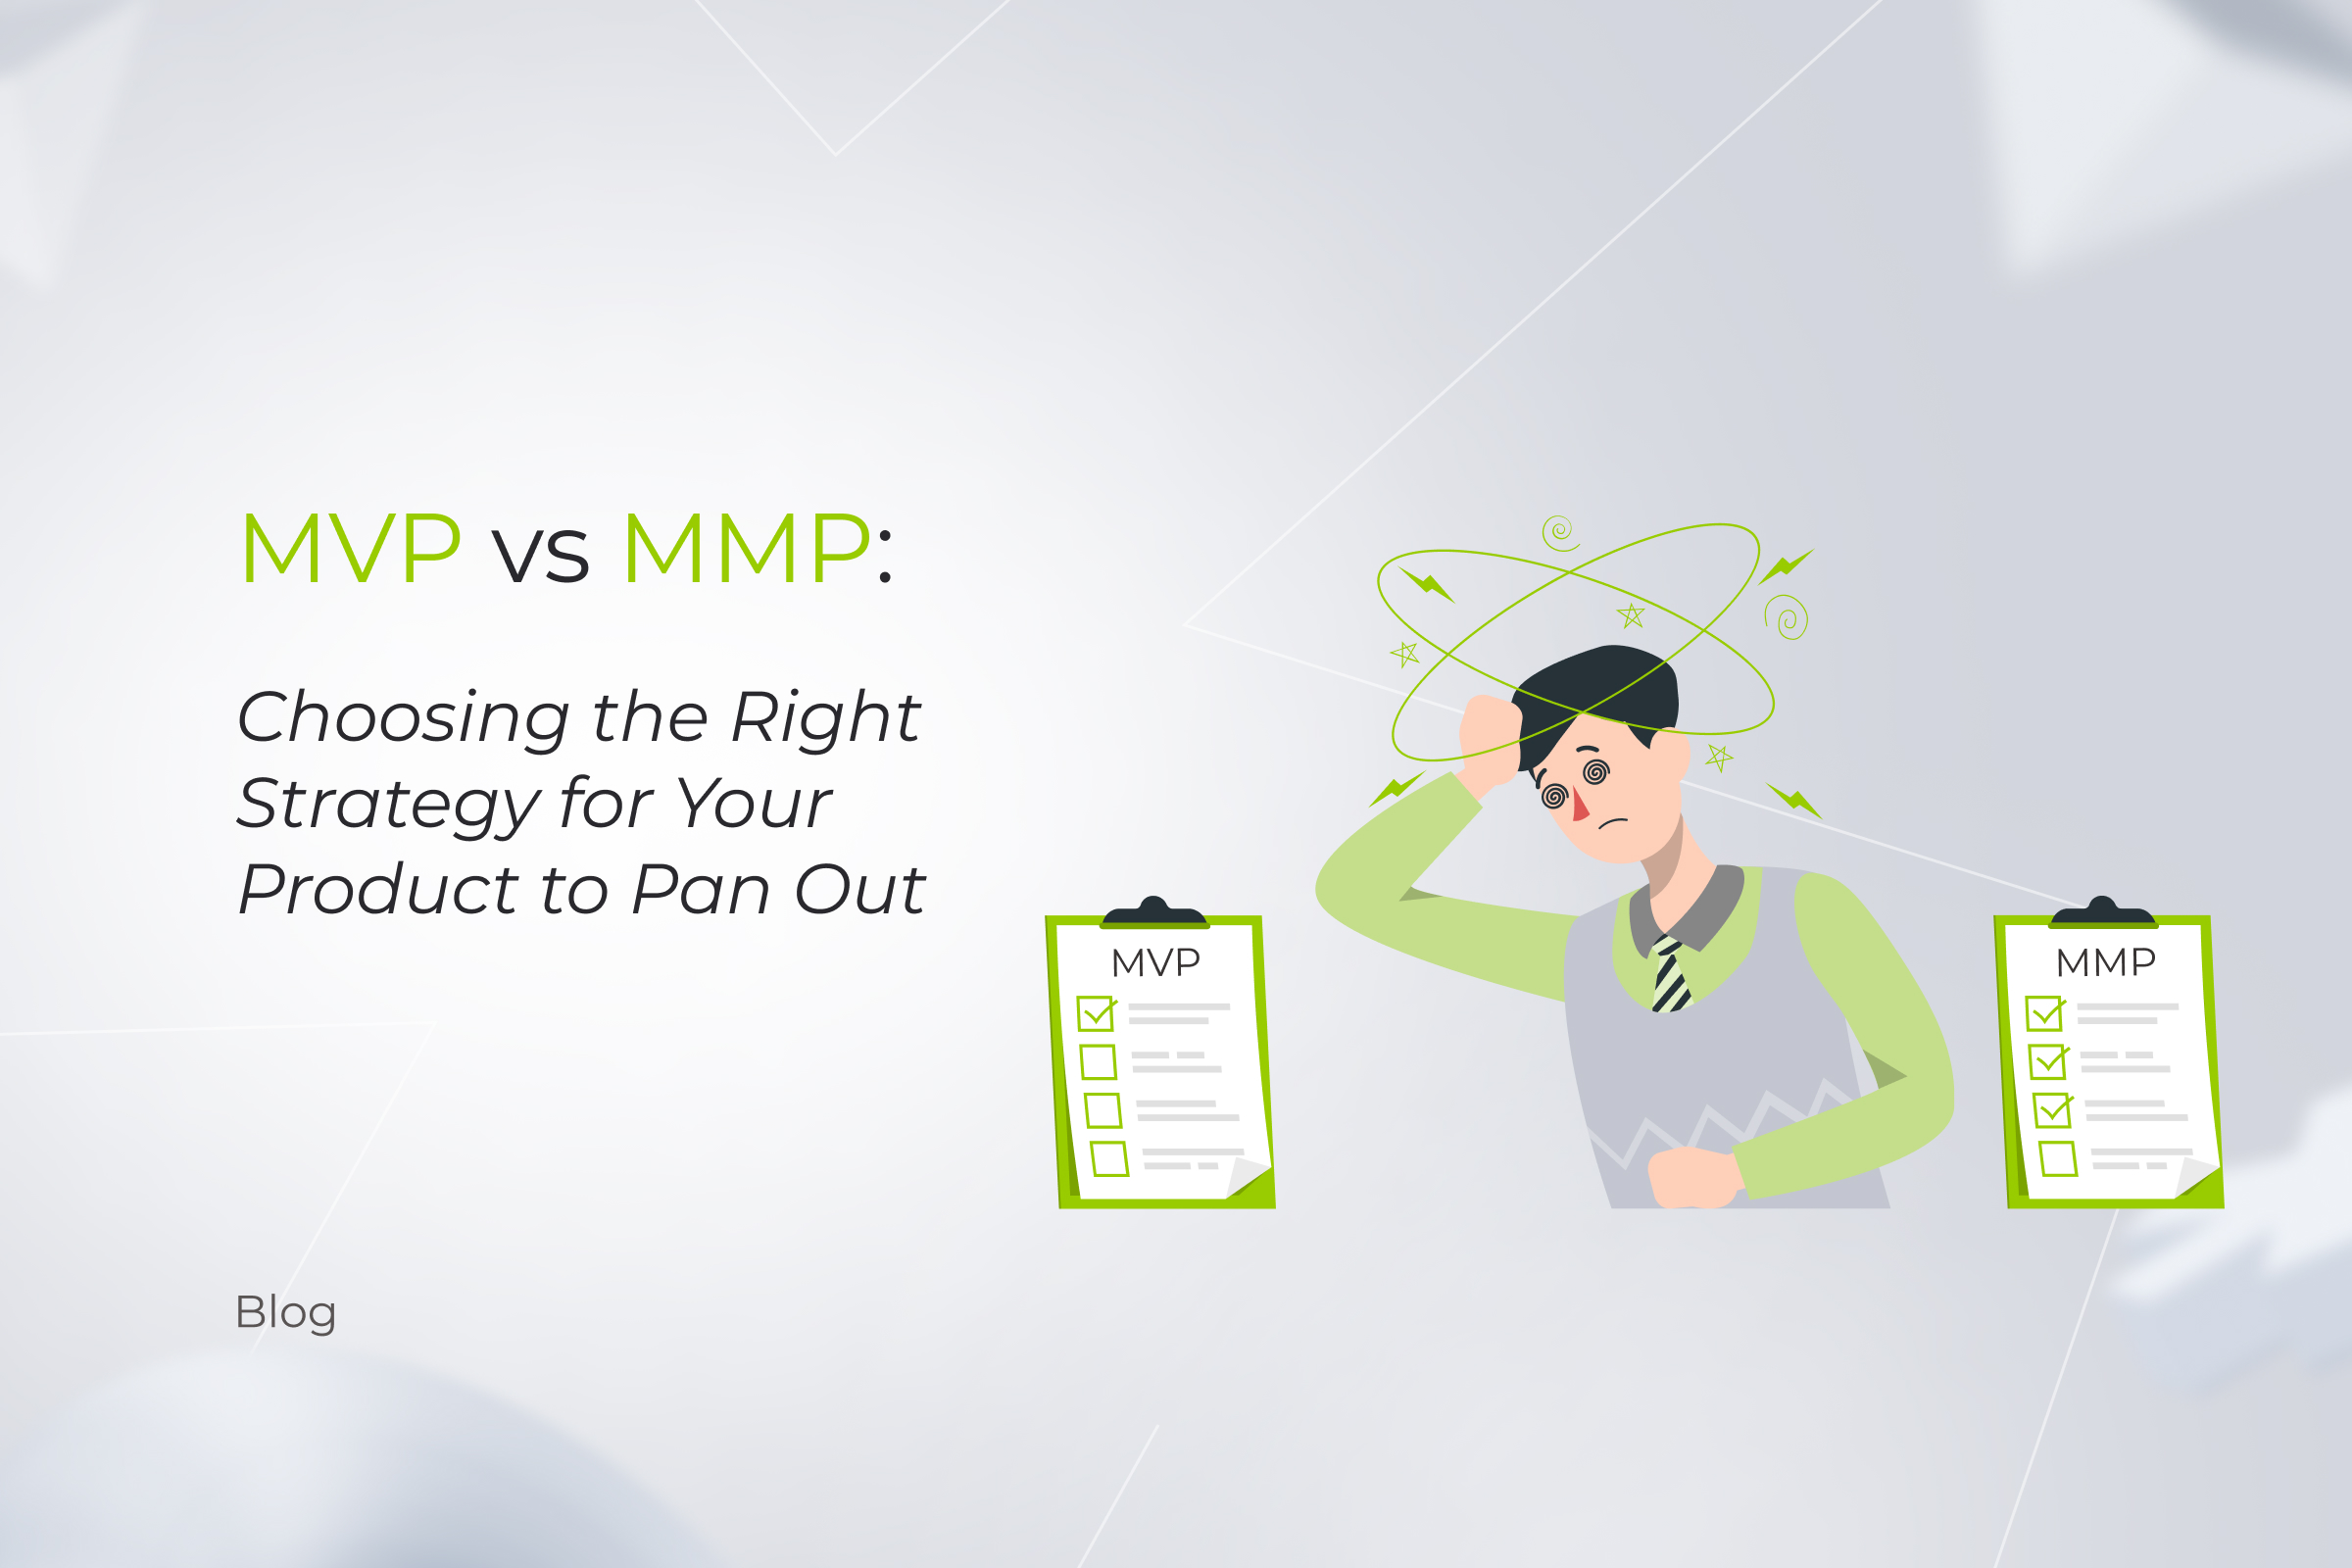 MVP vs MMP: Choosing the Right Strategy for Your Product to Pan Out